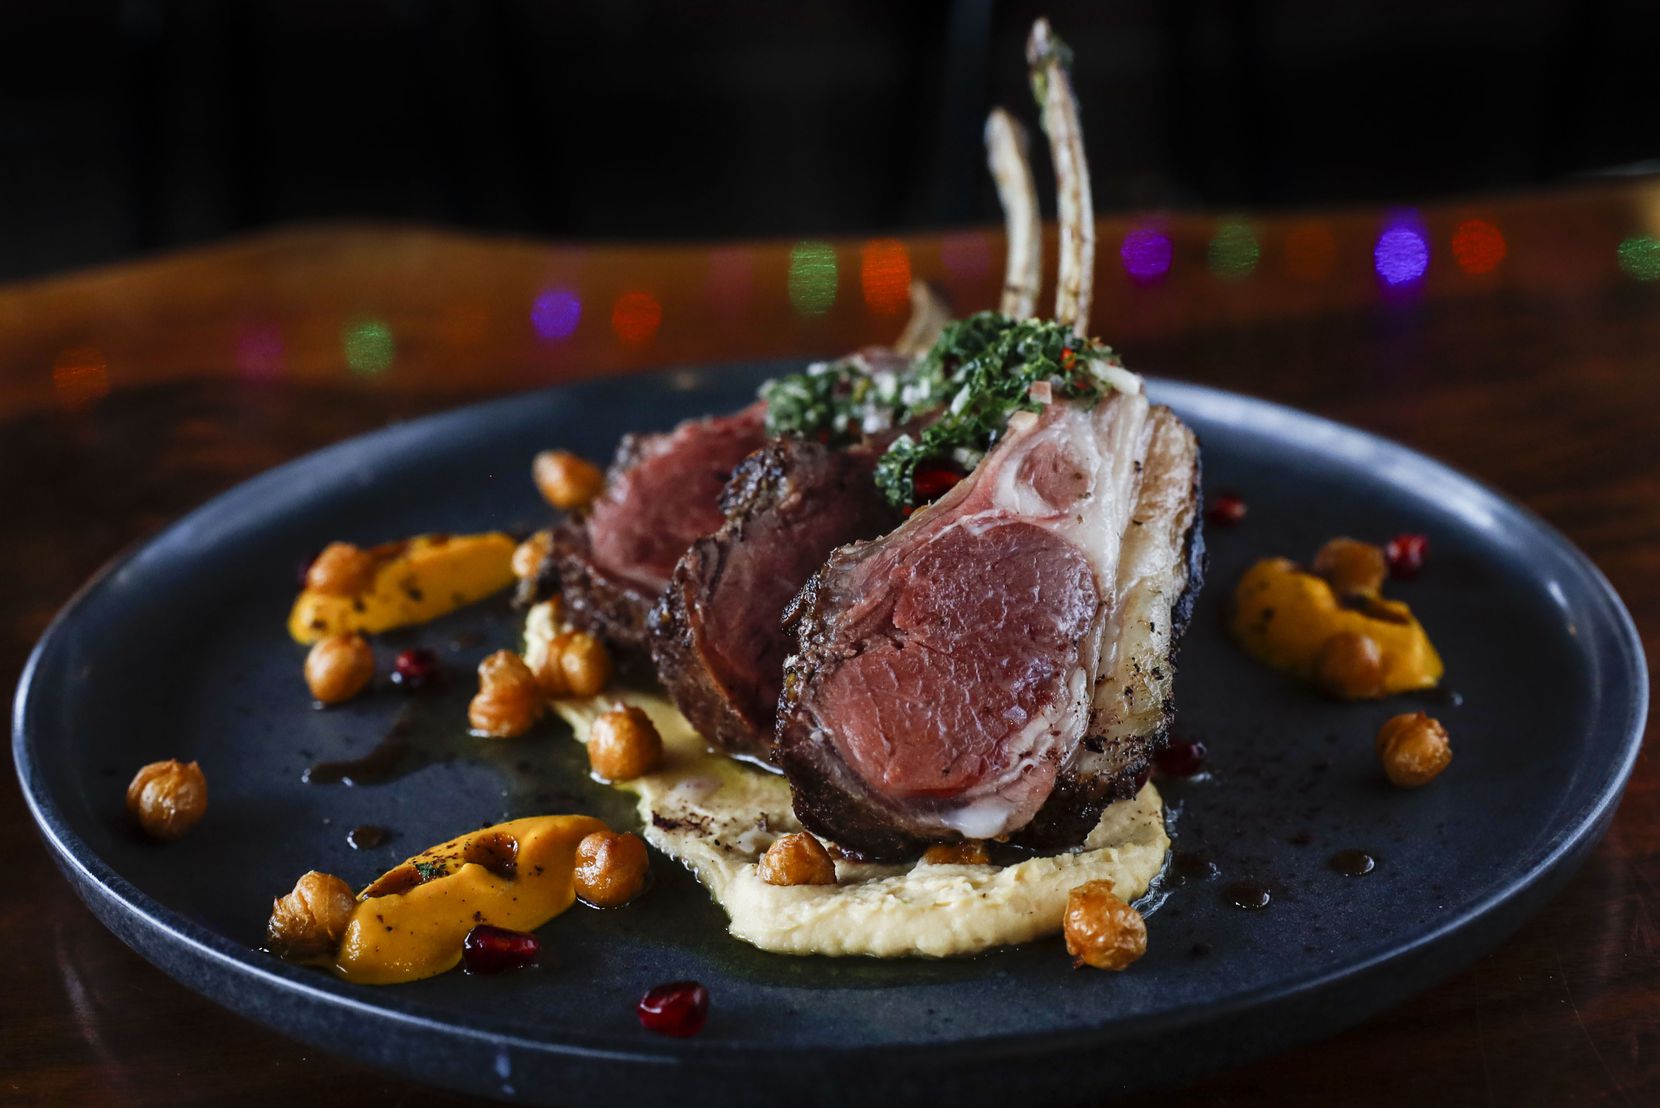 Elysian Fields rack of lamb is a part of Encina's Christmas dine-in special in Dallas. The dish includes chickpea puree, crispy chickpeas and mint-pomegranate salsa verde.